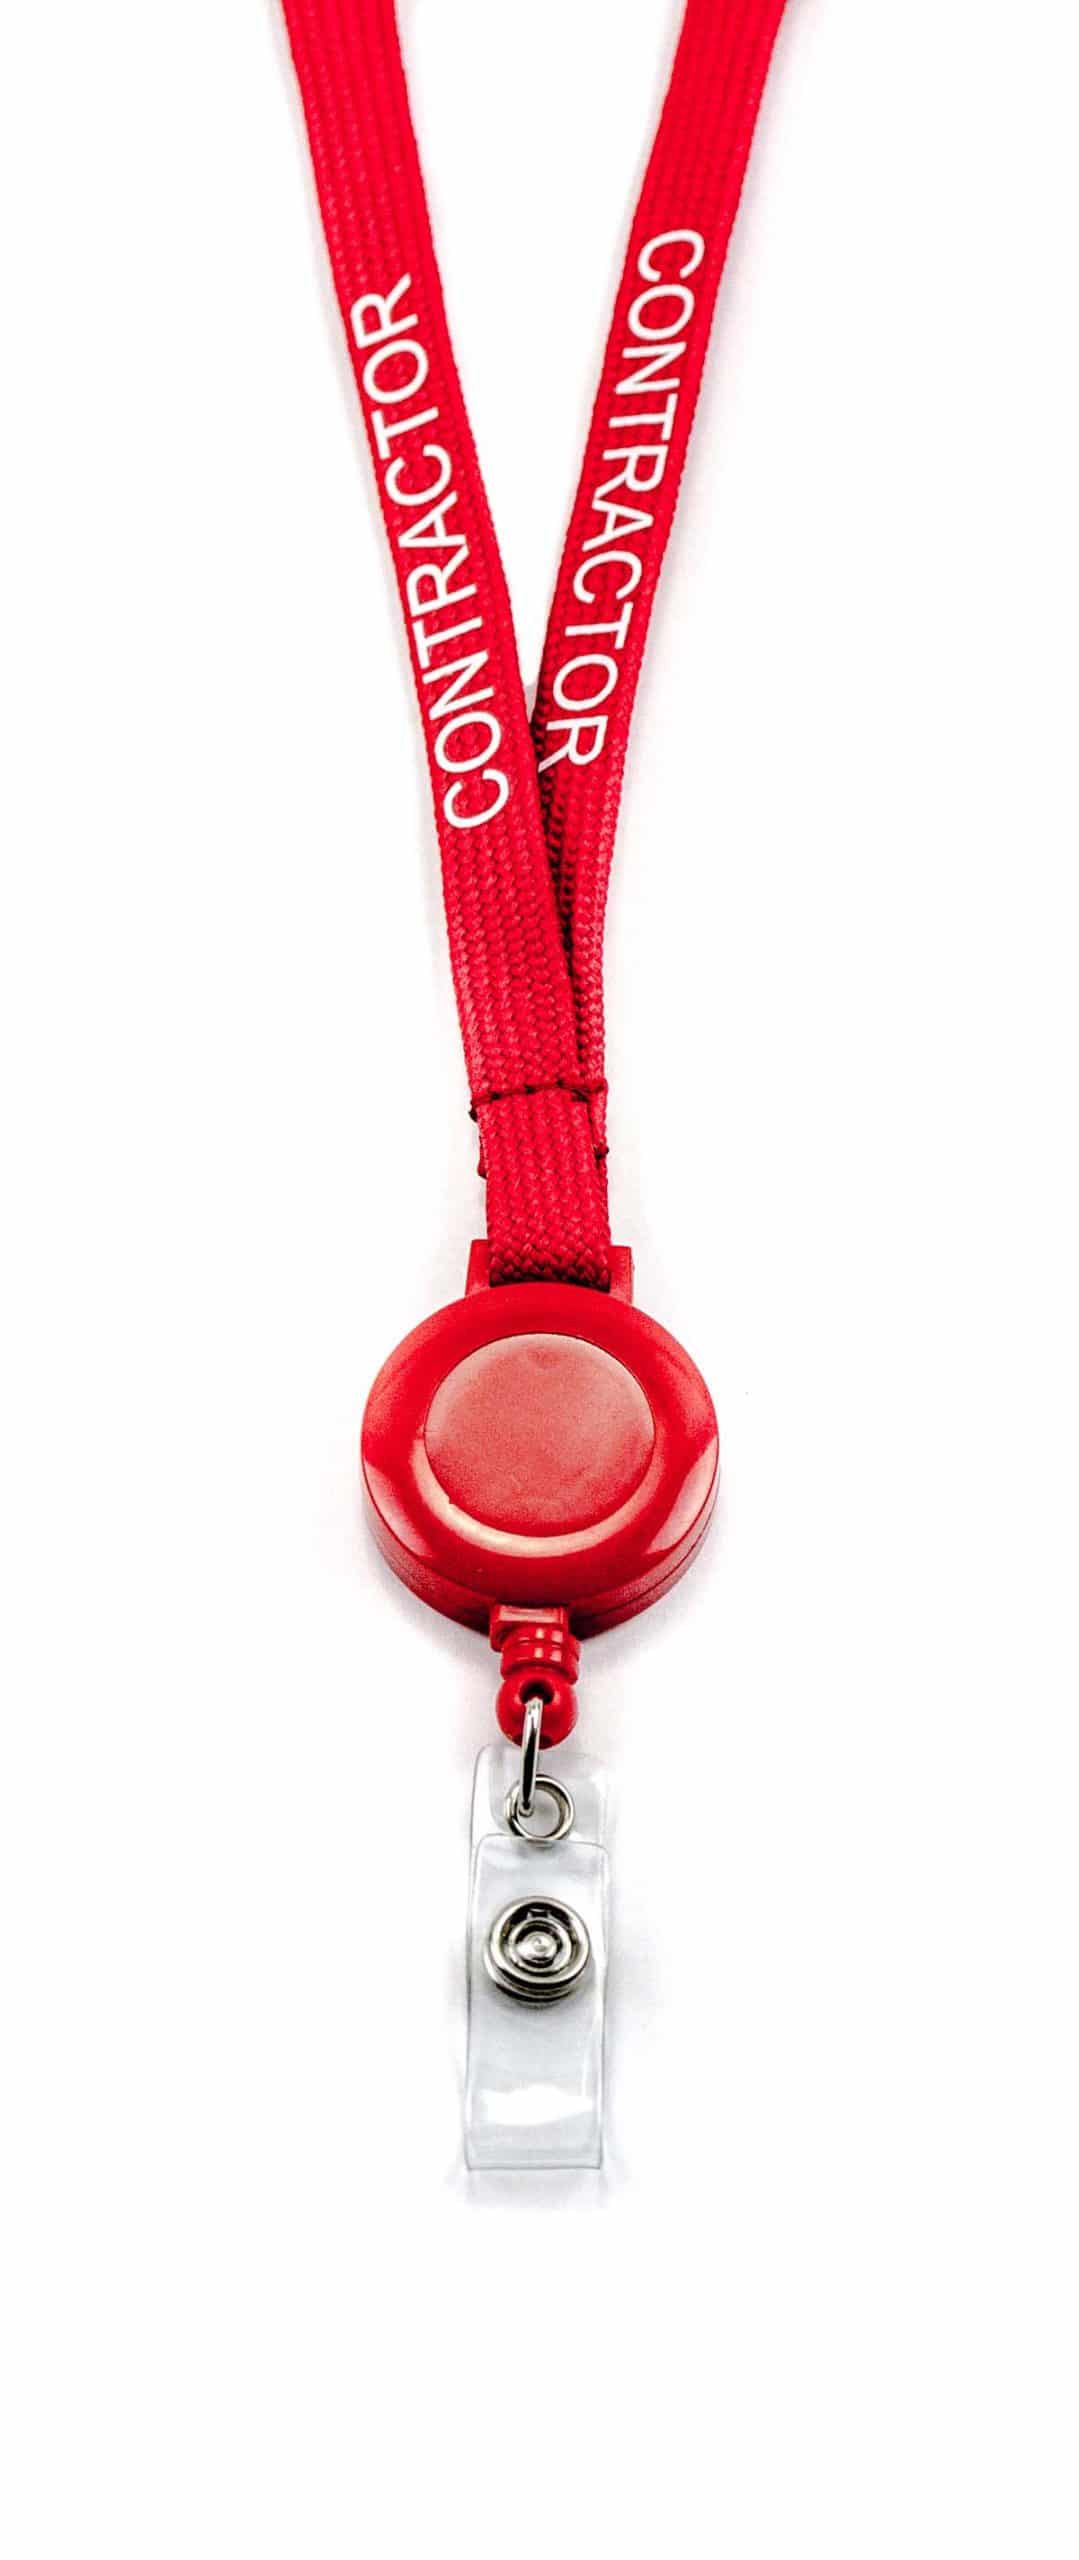 https://www.redstrawberry.co.uk/wp-content/uploads/nc/data/images/RS15/20088-Contractor-Red-Retractable-Lanyard-2-scaled.jpg